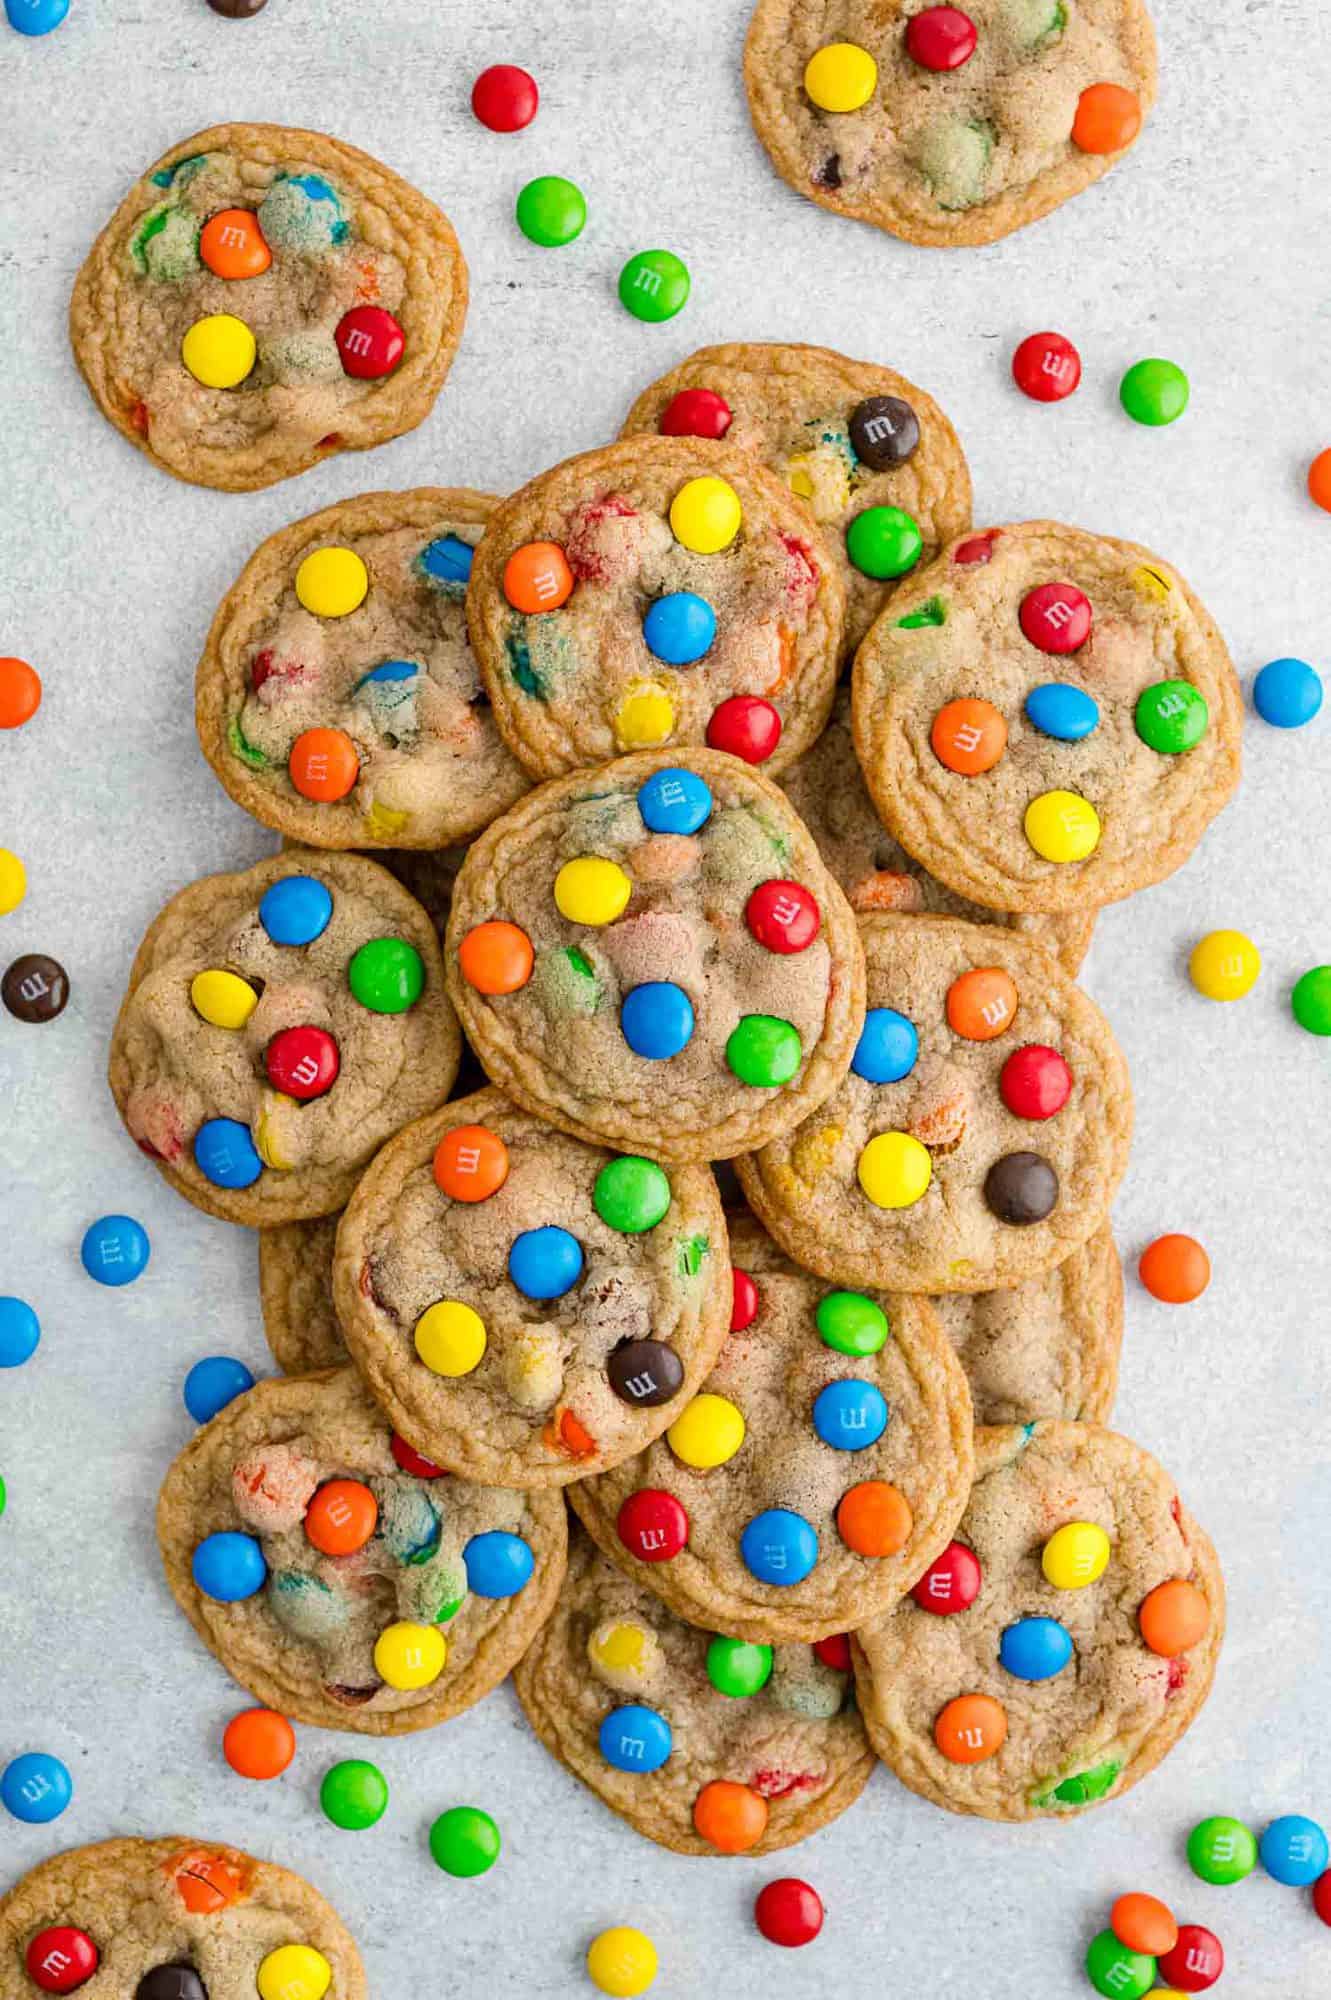 Large pile of cookies with M&Ms.